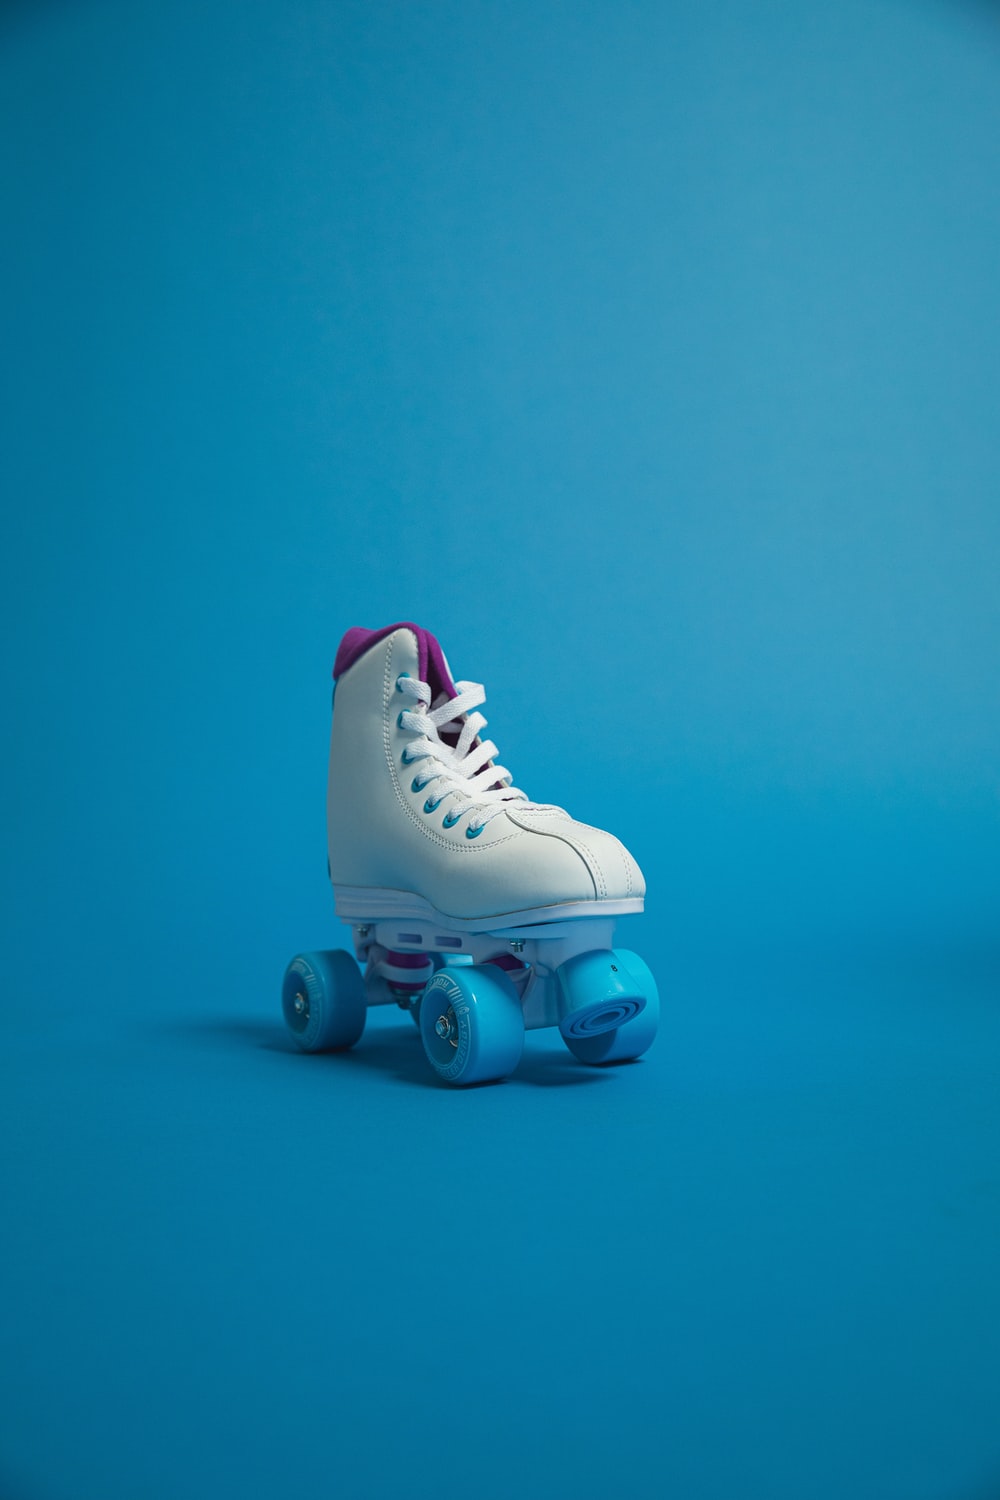 Roller Skate Picture. Download Free Image